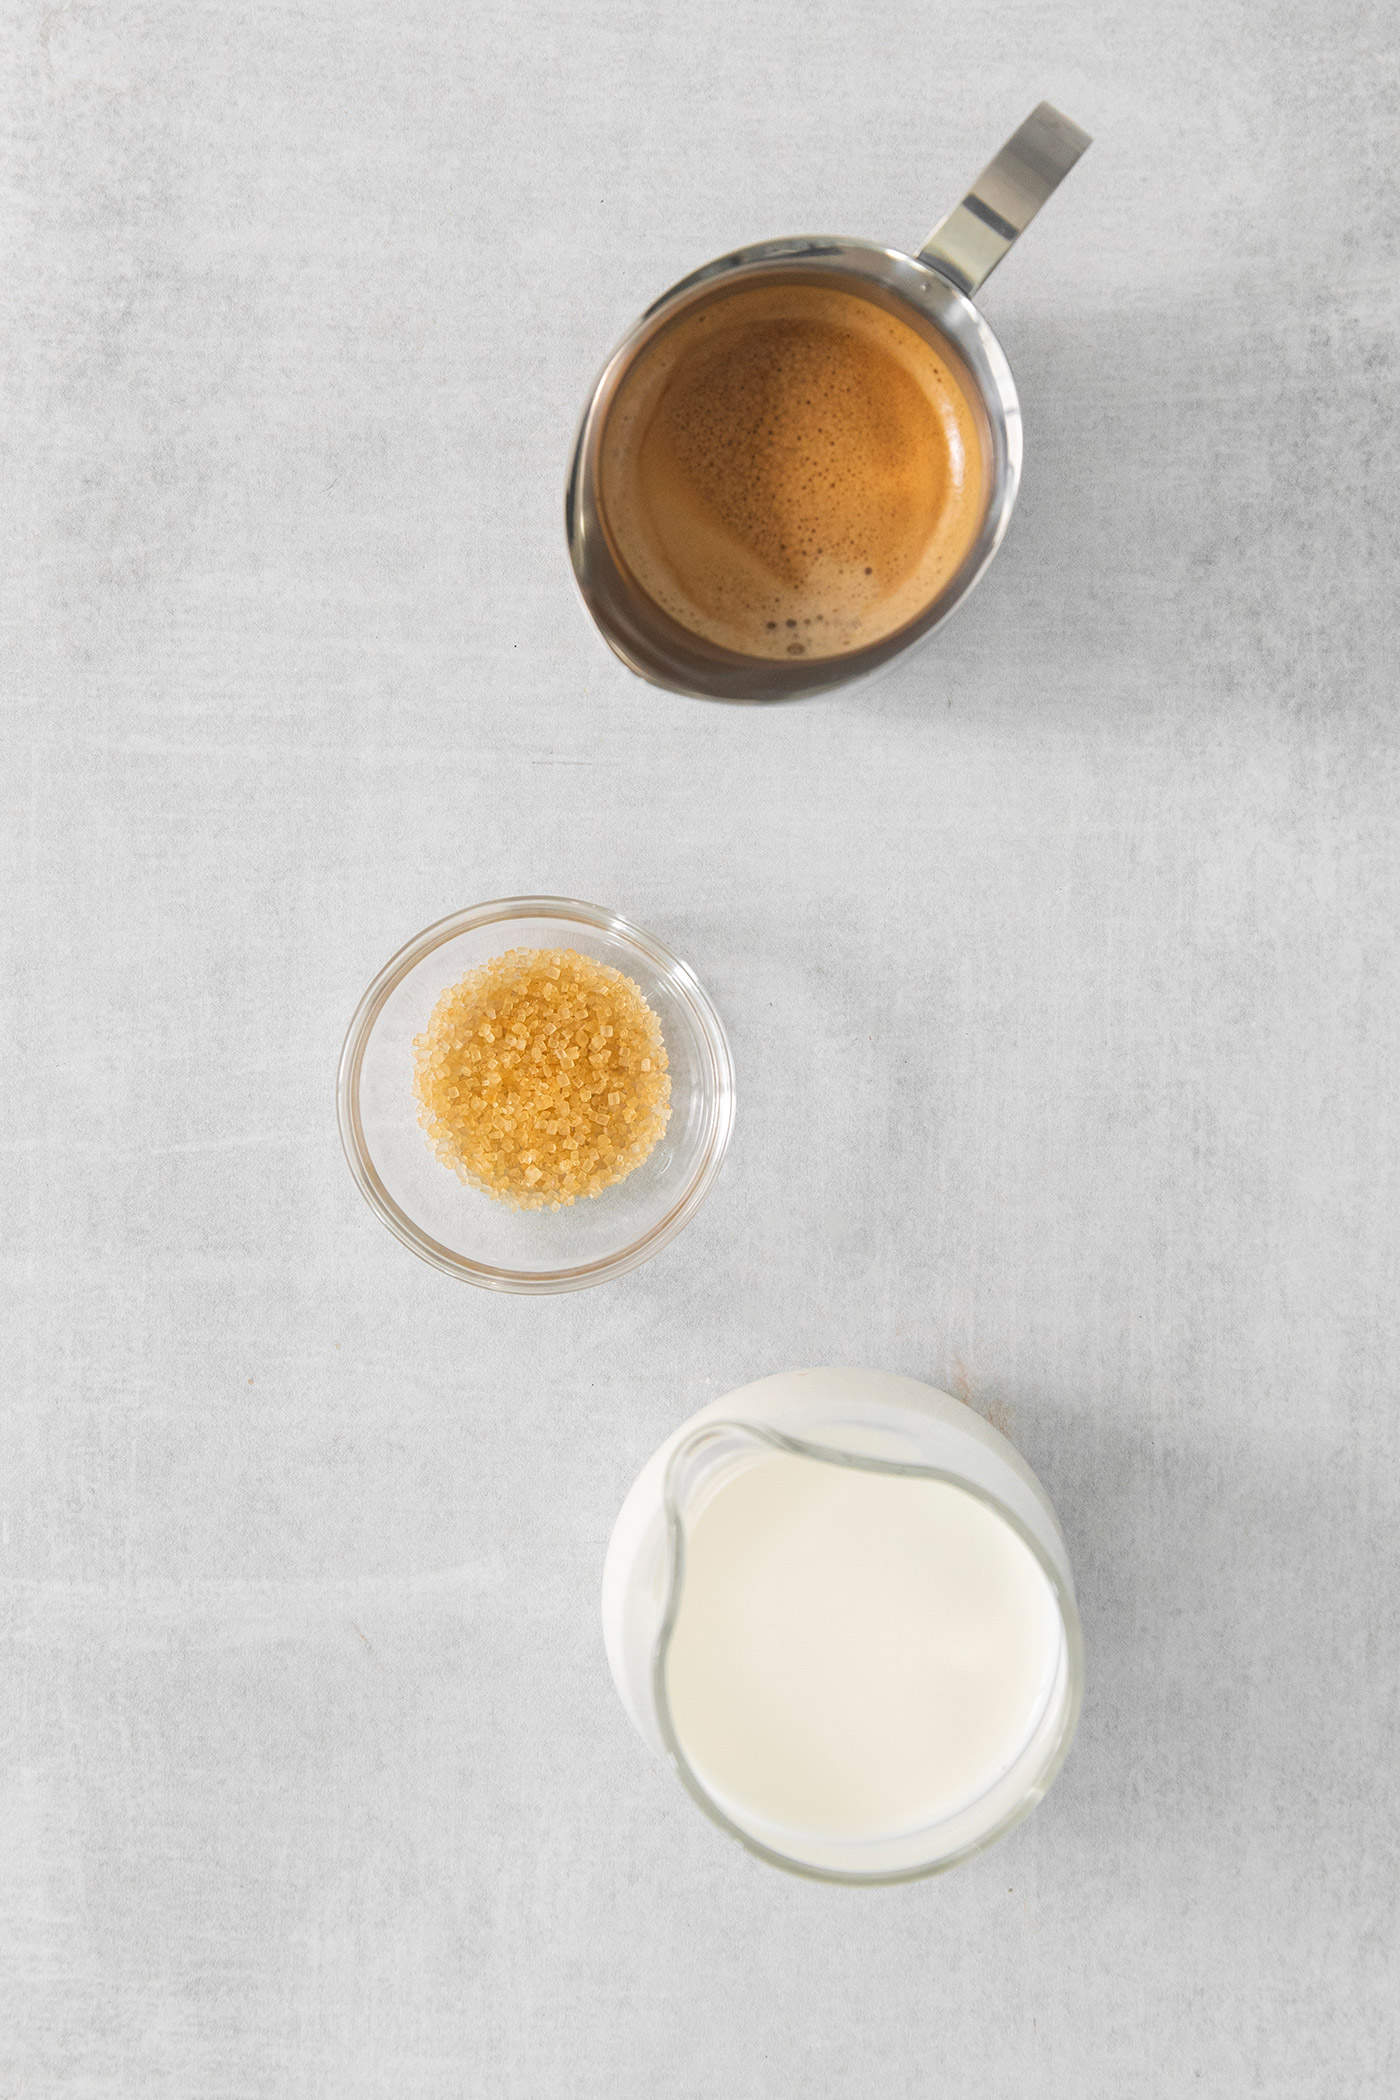 The ingredients for cortadito are shown on a white background: milk, sugar, and espresso.